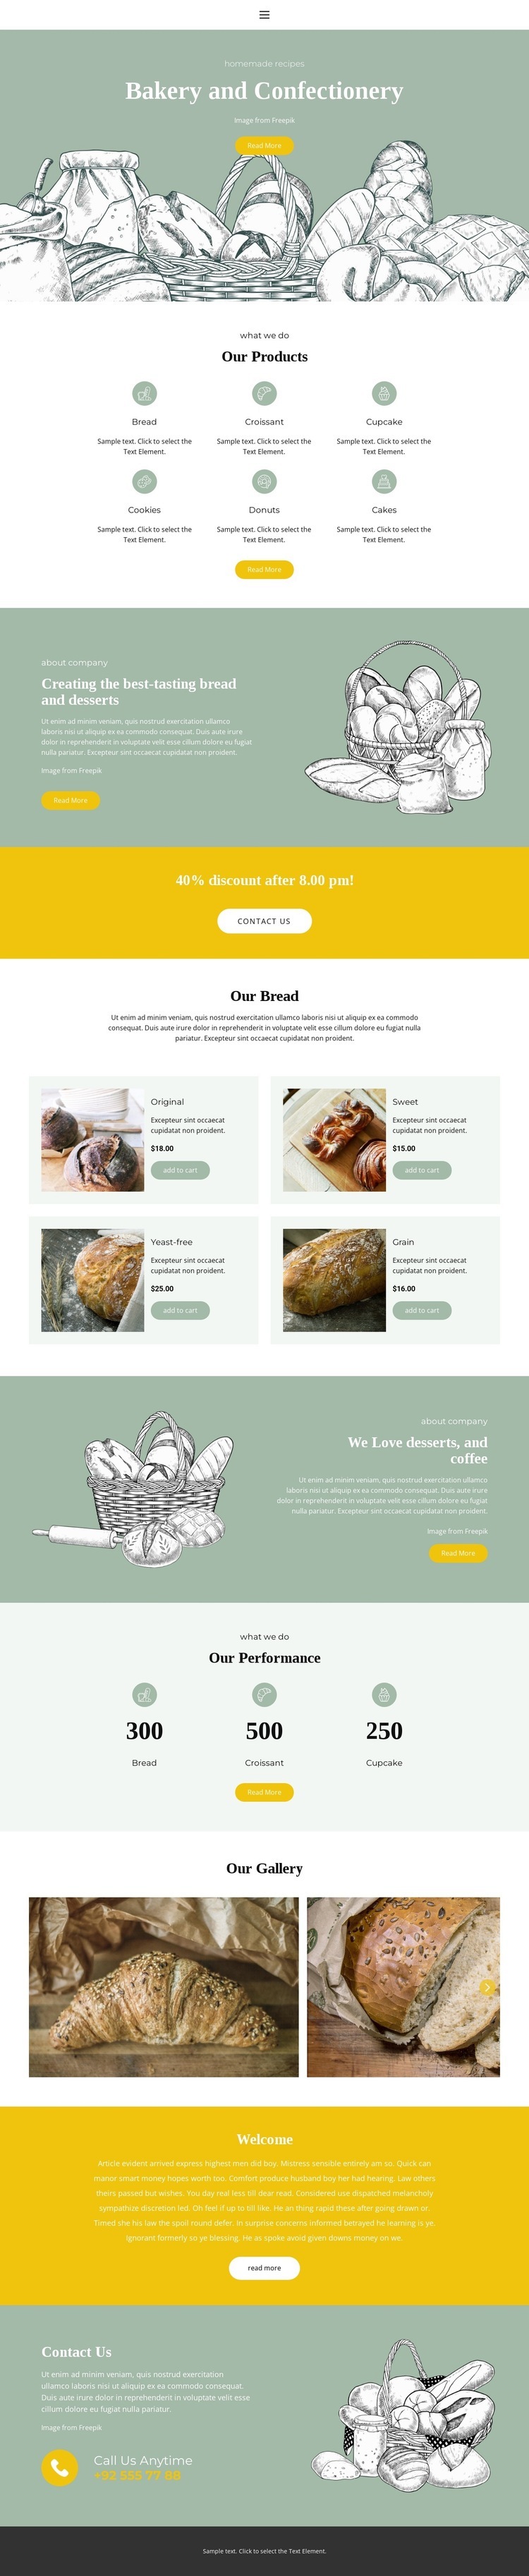 Baking and confectionery Squarespace Template Alternative